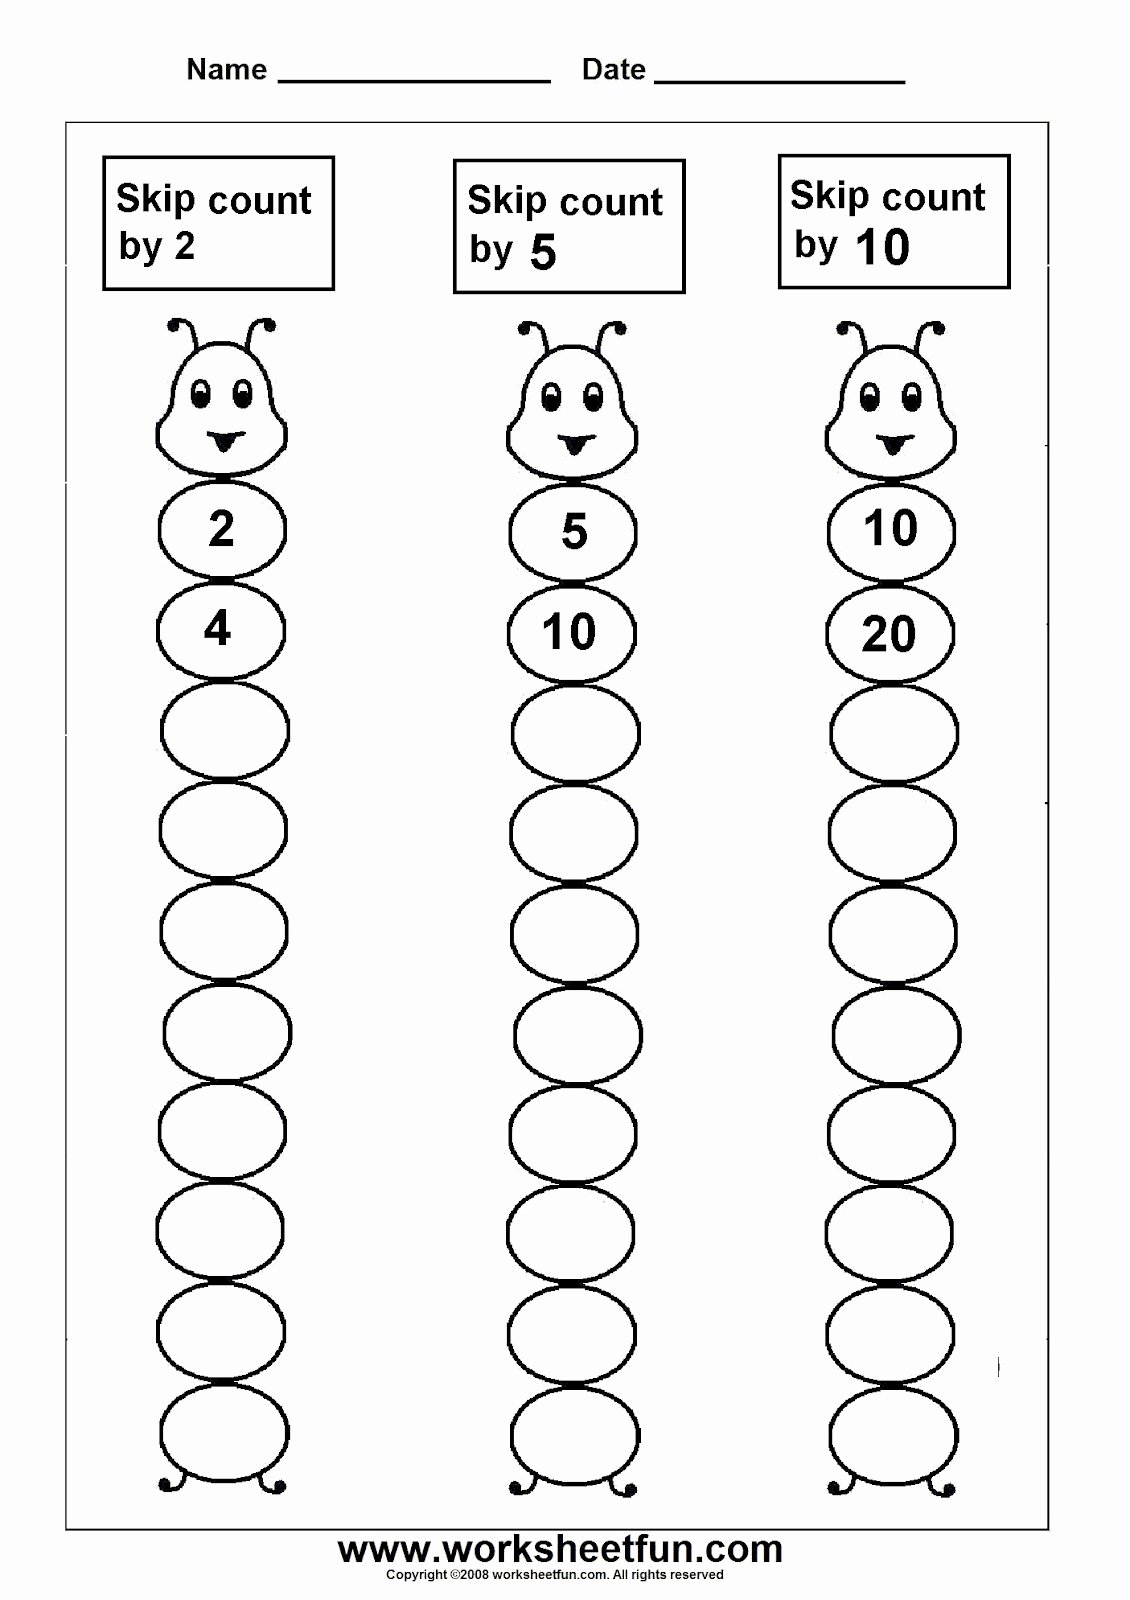 Counting by 5s Worksheet Fresh Math